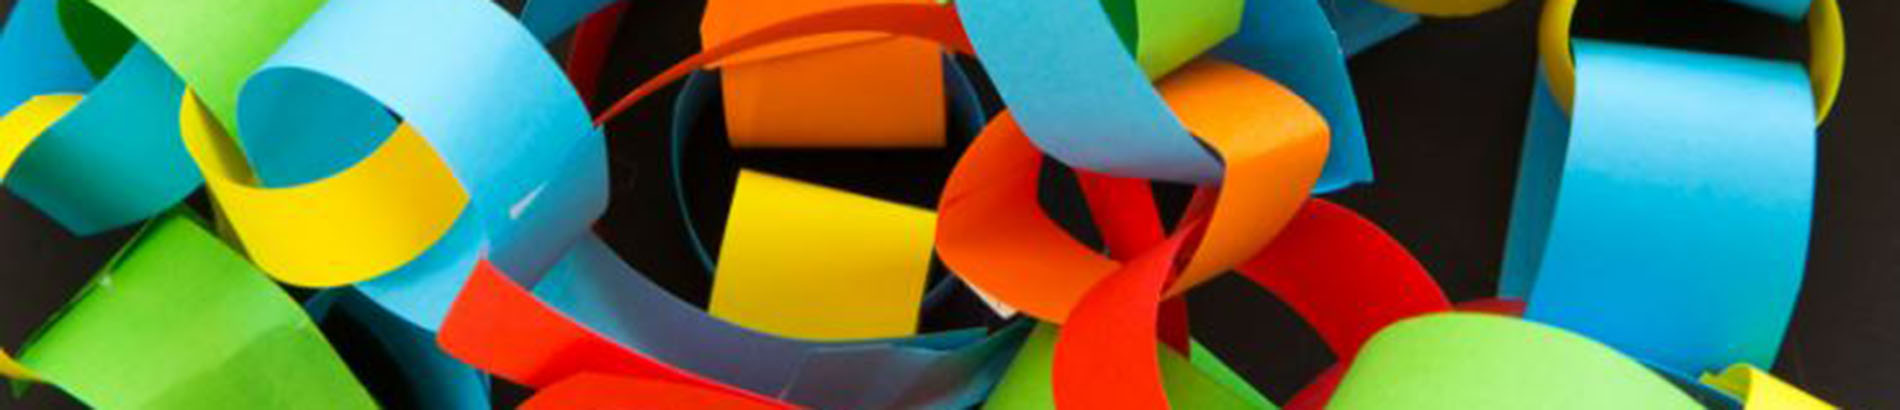 Colourful pile of paper chains